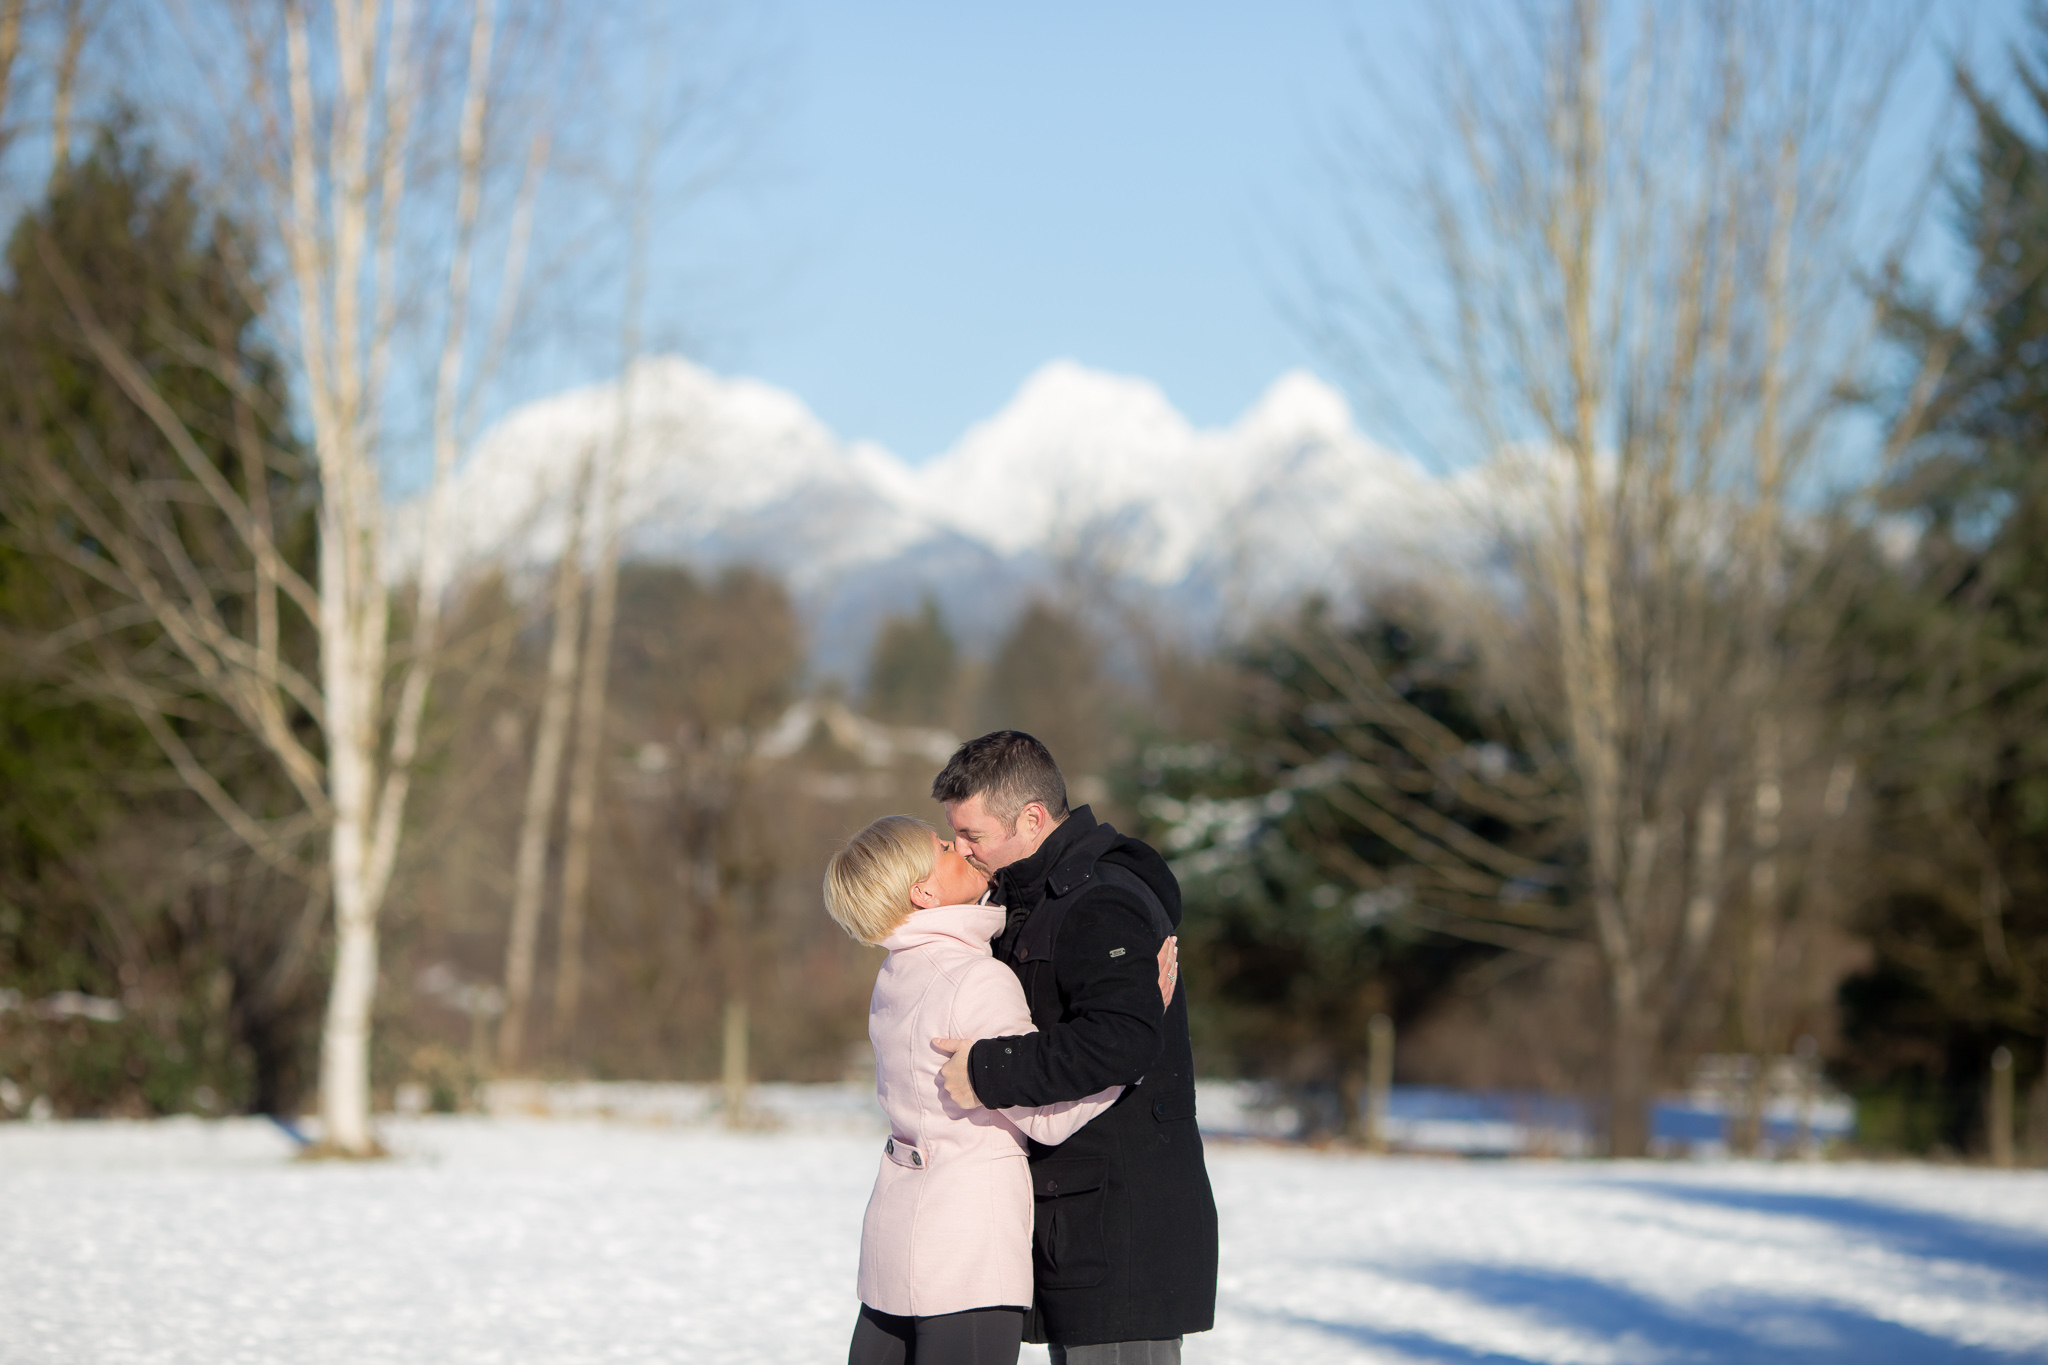 Victoria & Paul’s Langley Winter Photography Session